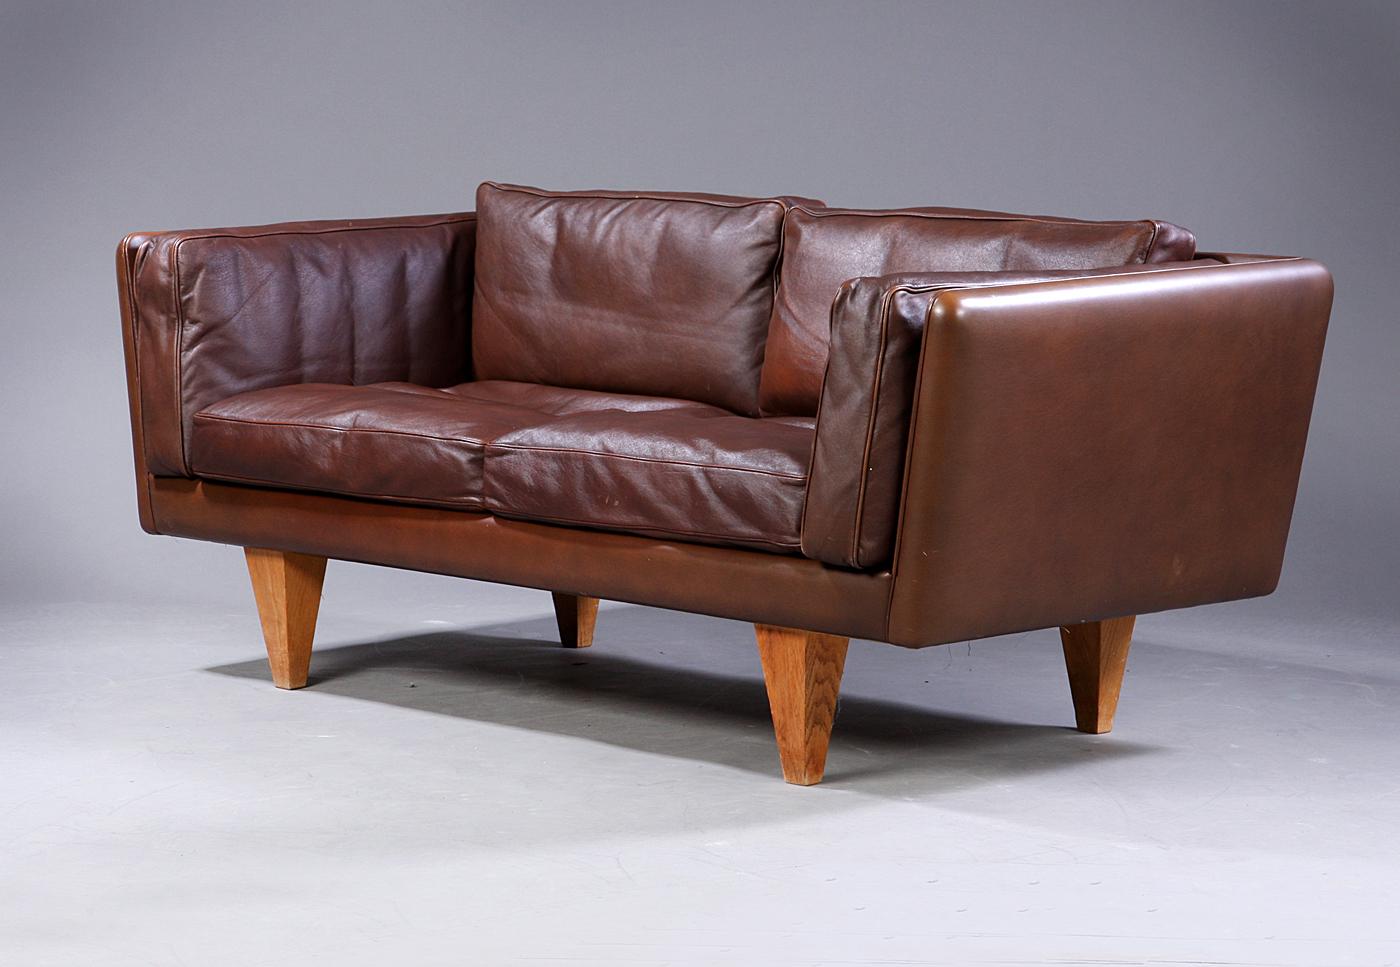 Illum Wikkelsø 1919-1999. Two-seat sofa, freestanding, upholstered in brown patinated sturdy leather, loose cushions with down filling, cone-shaped oak legs. Produced by Holger Kristiansen, V11 series, 1960s-1970s. Measures: H. 67/41 cm. L. 167 cm.